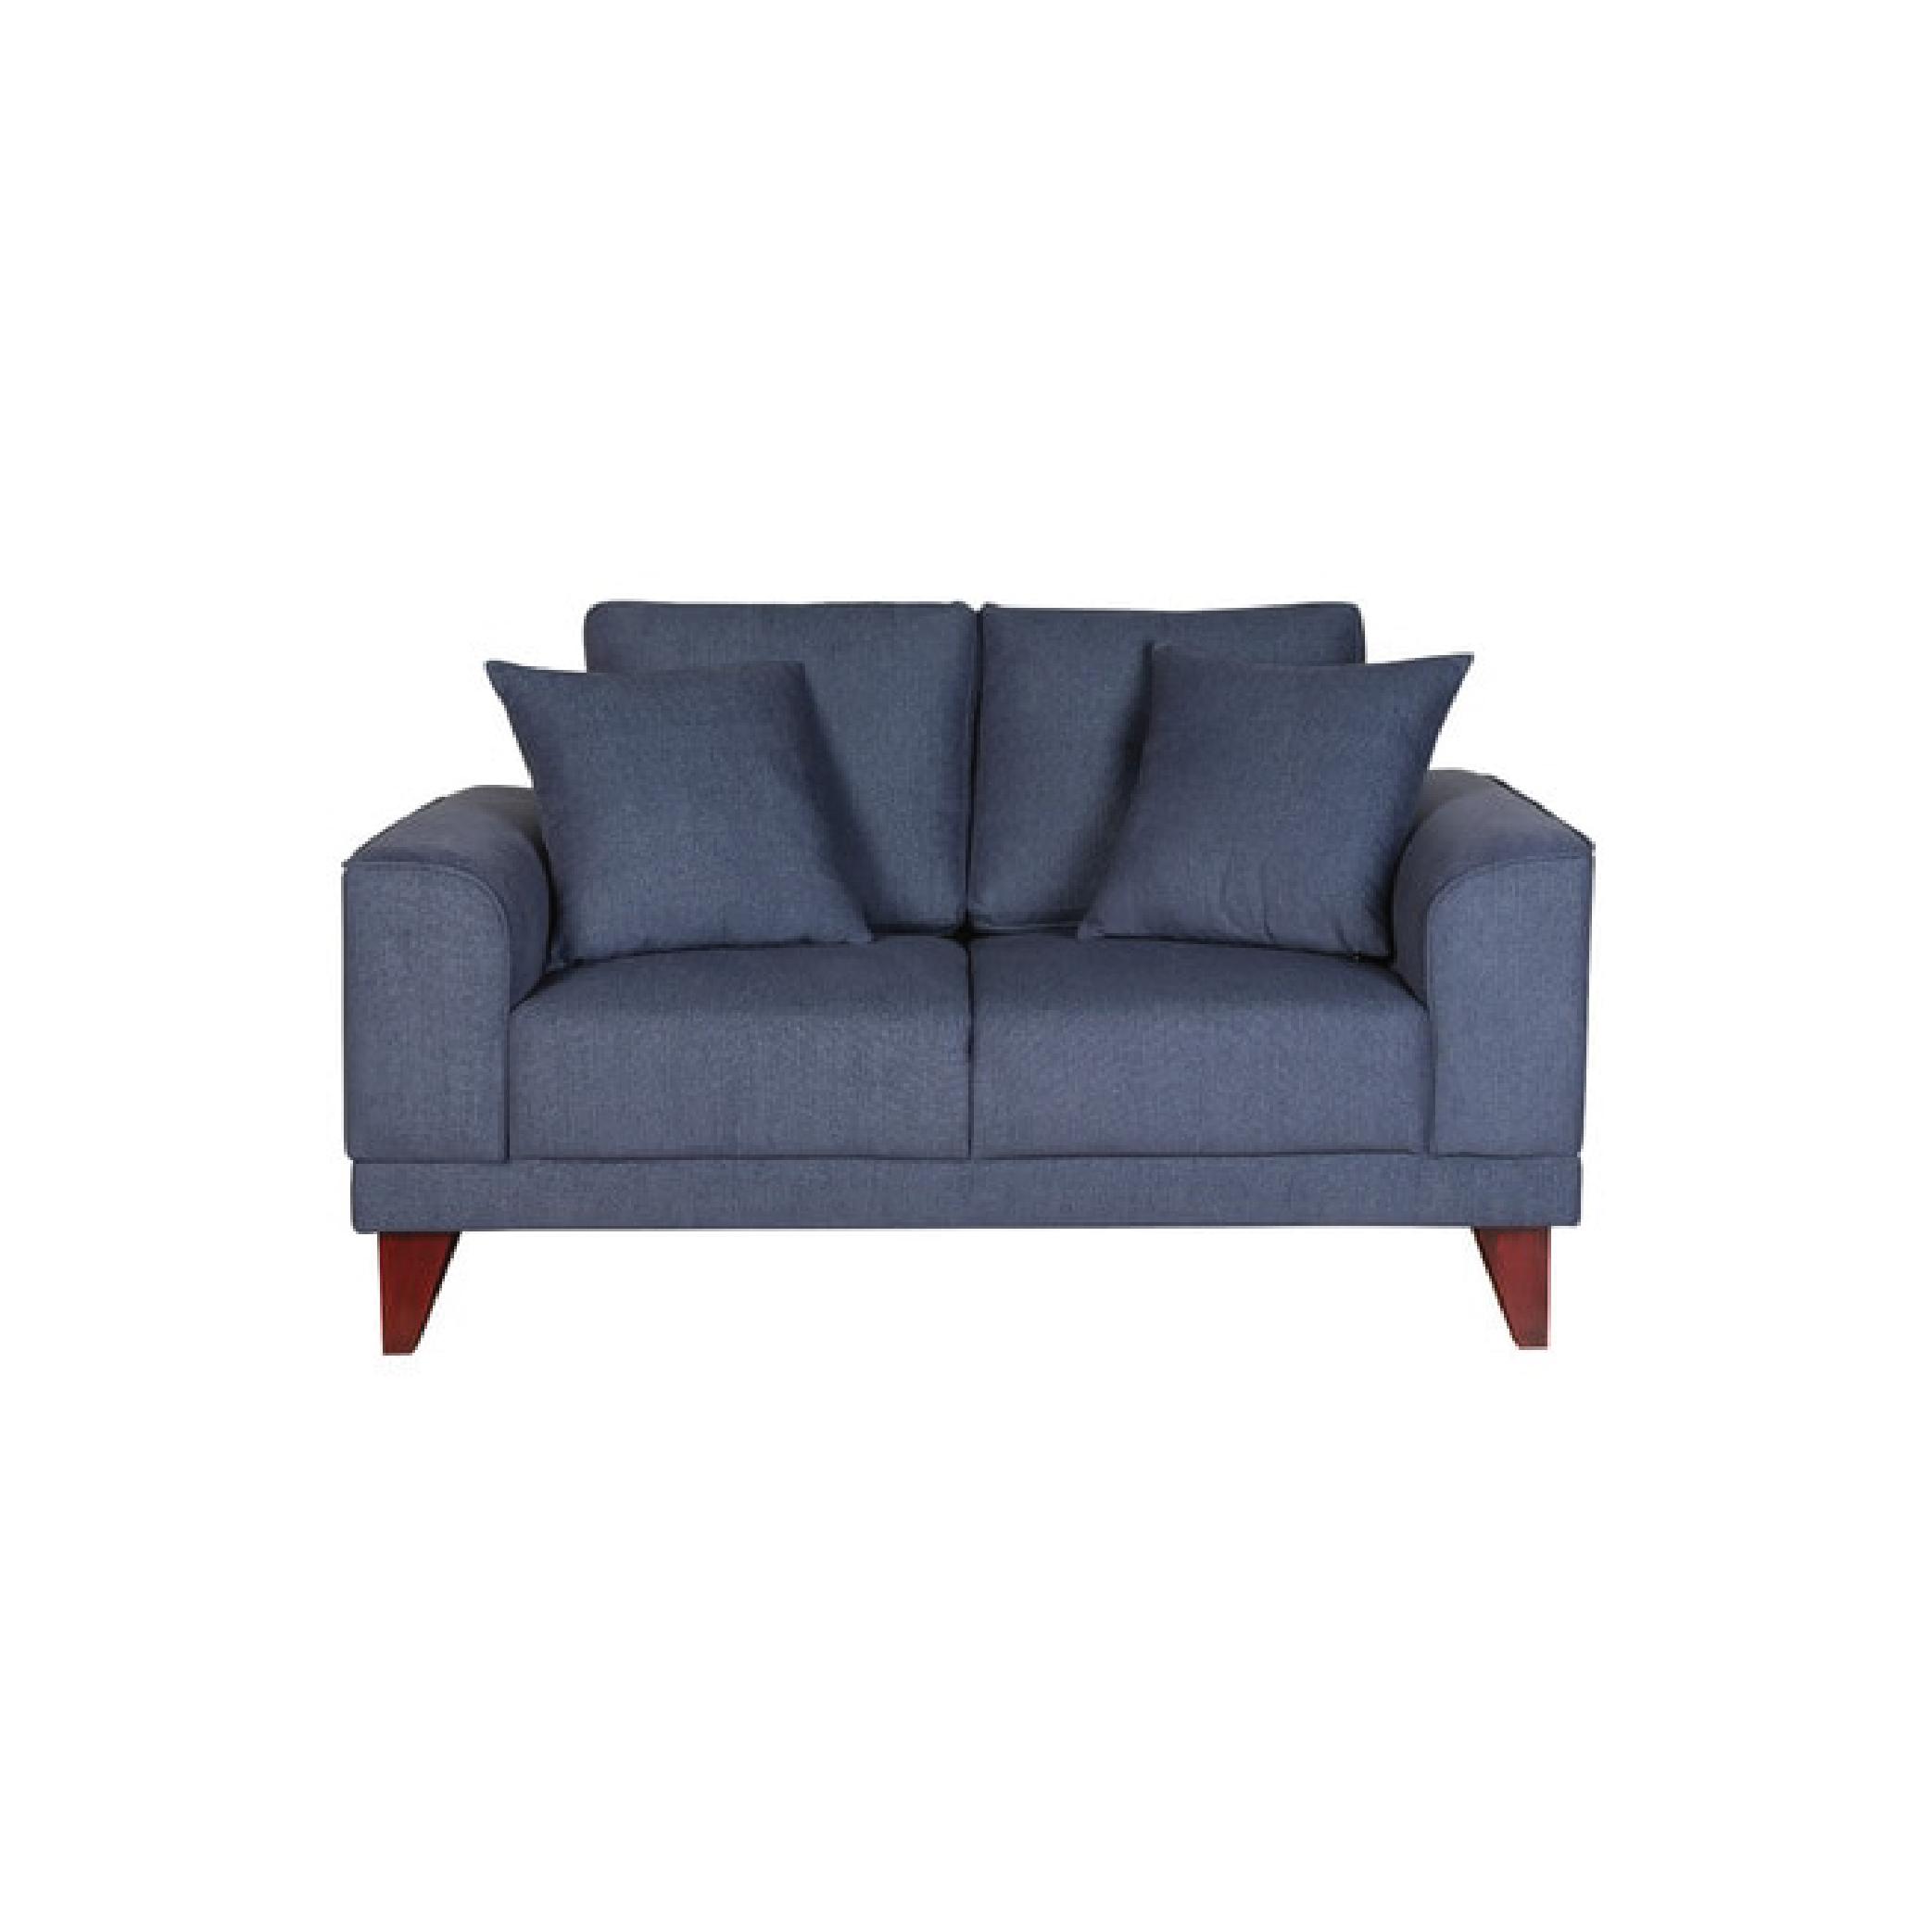 Arco Two Seater Sofa in Navy Blue Colour